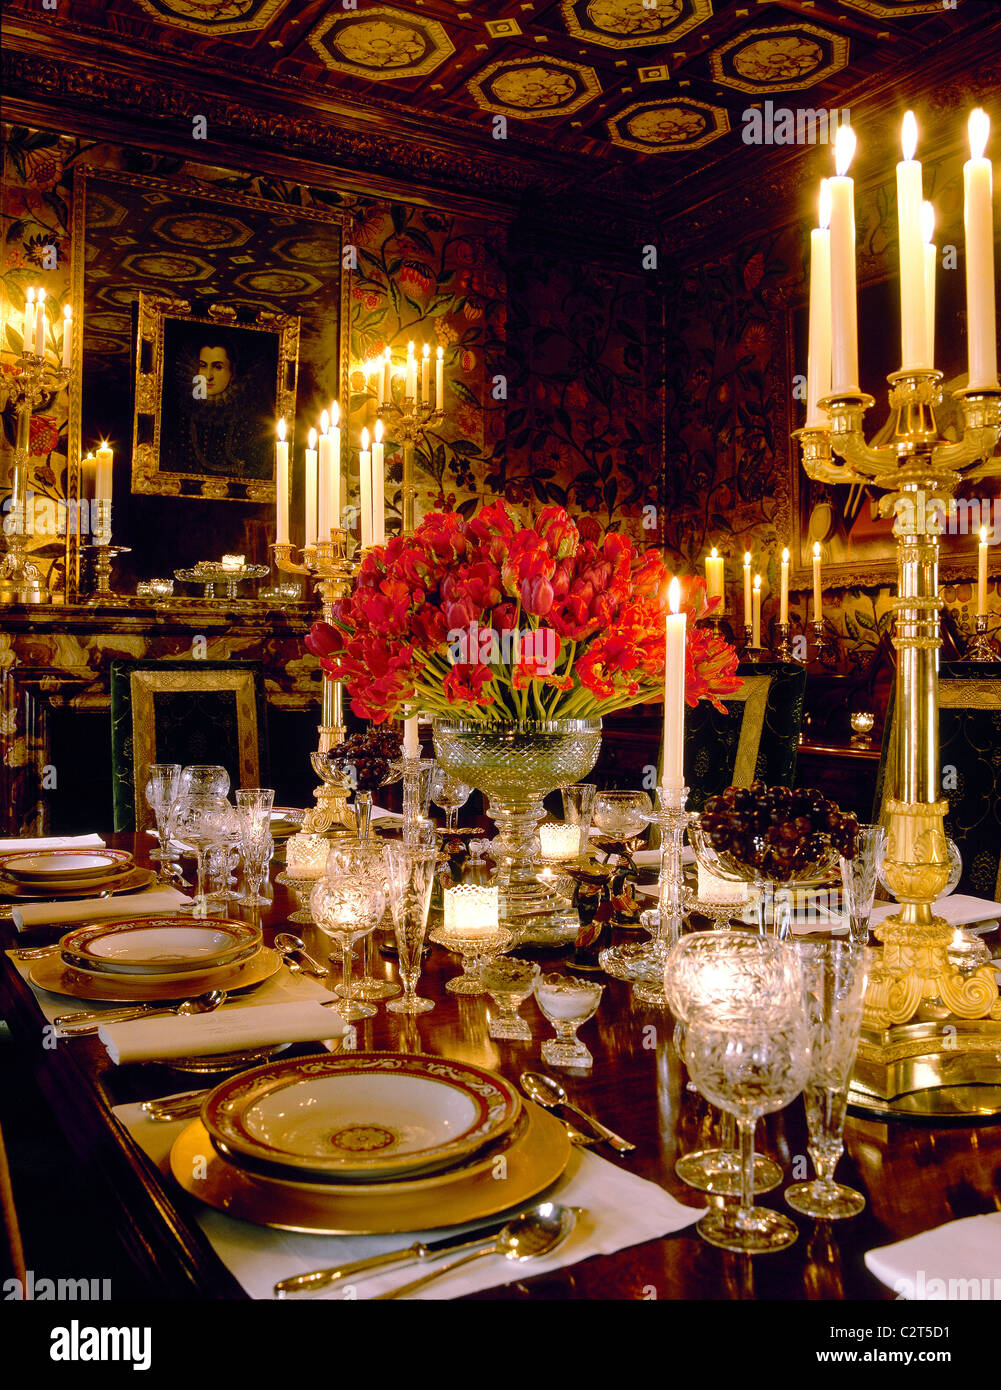 Traditional dining room, dinner service, table setting, silver